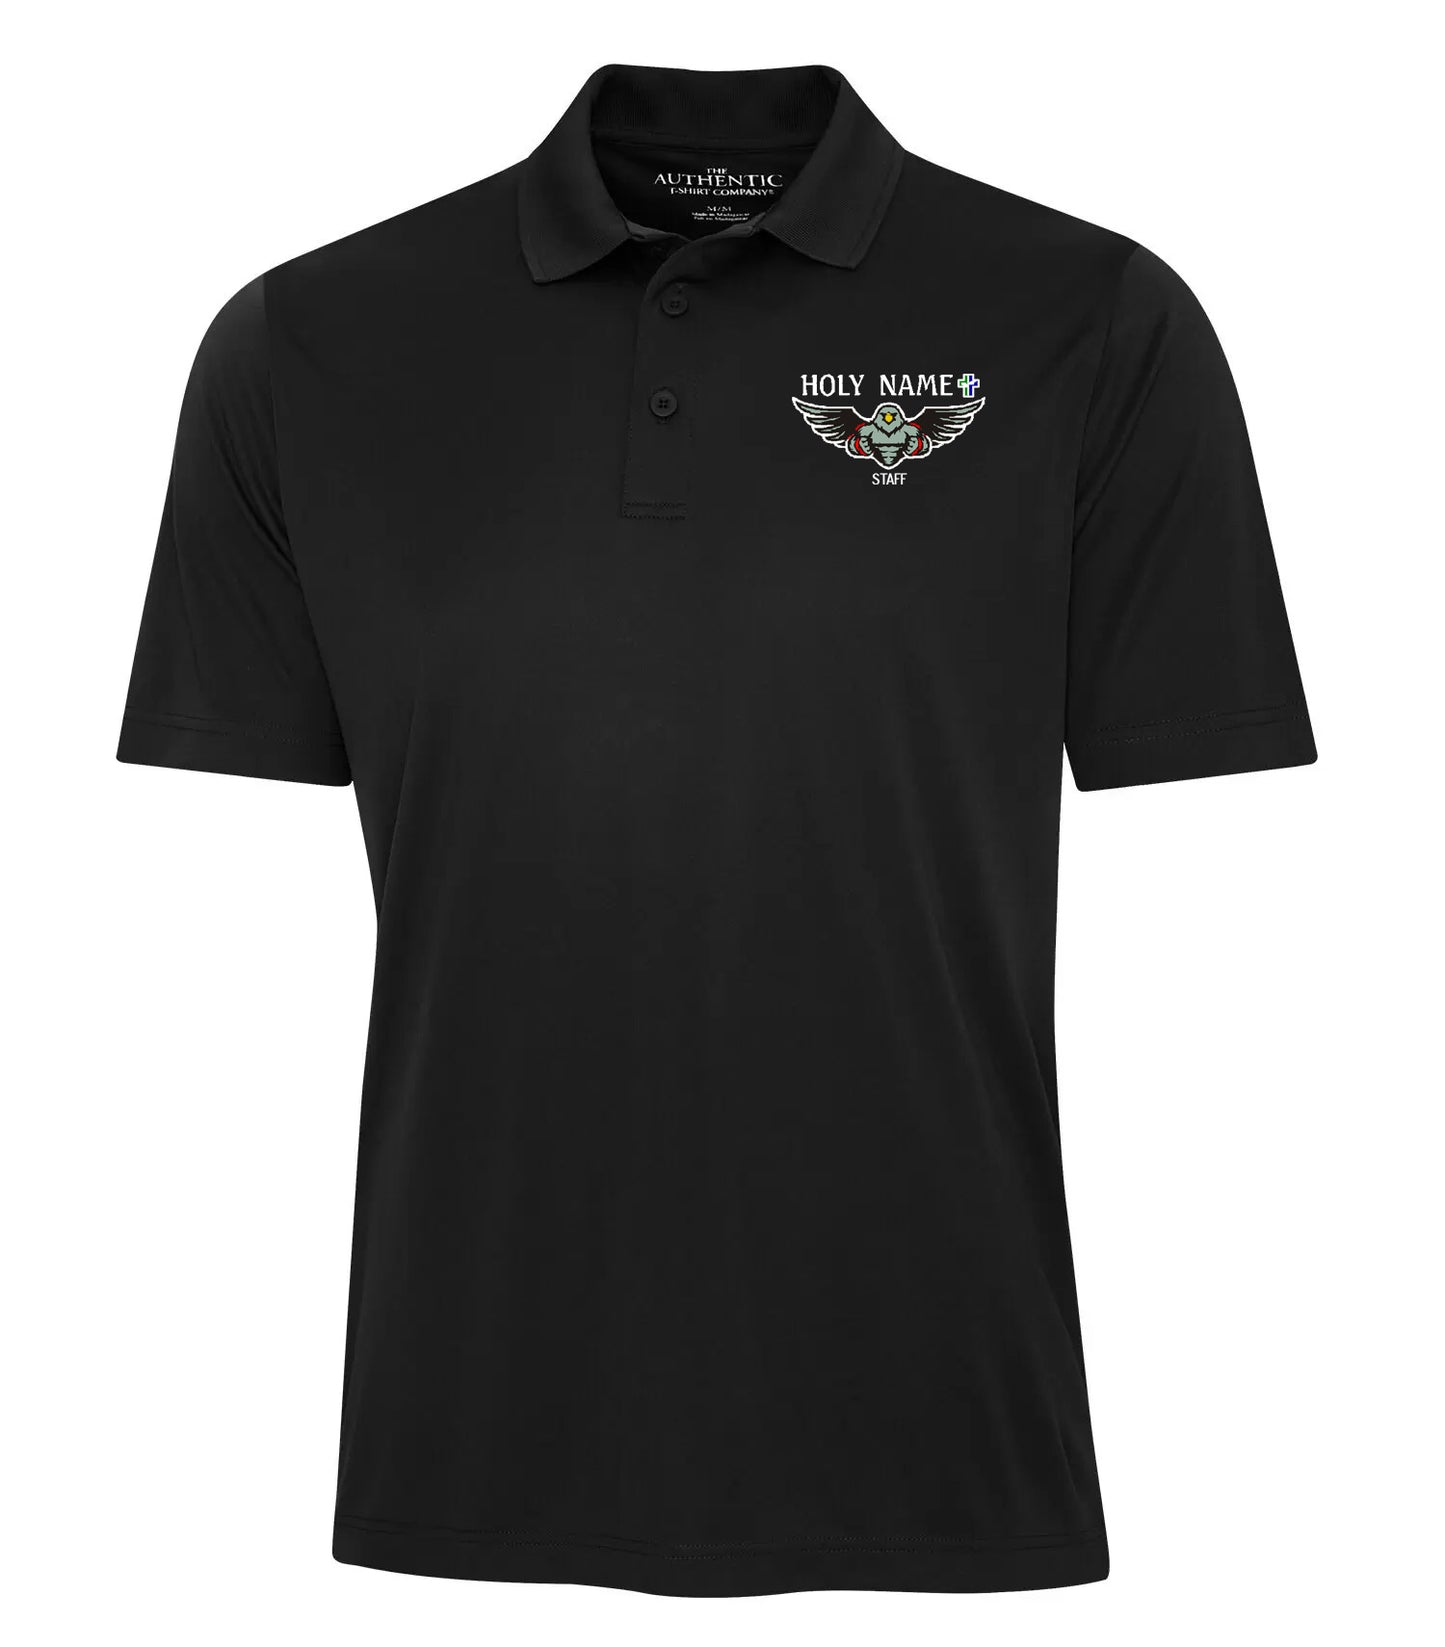 *NEW* Holy Name STAFF ATC Spirit Wear Adult Polo